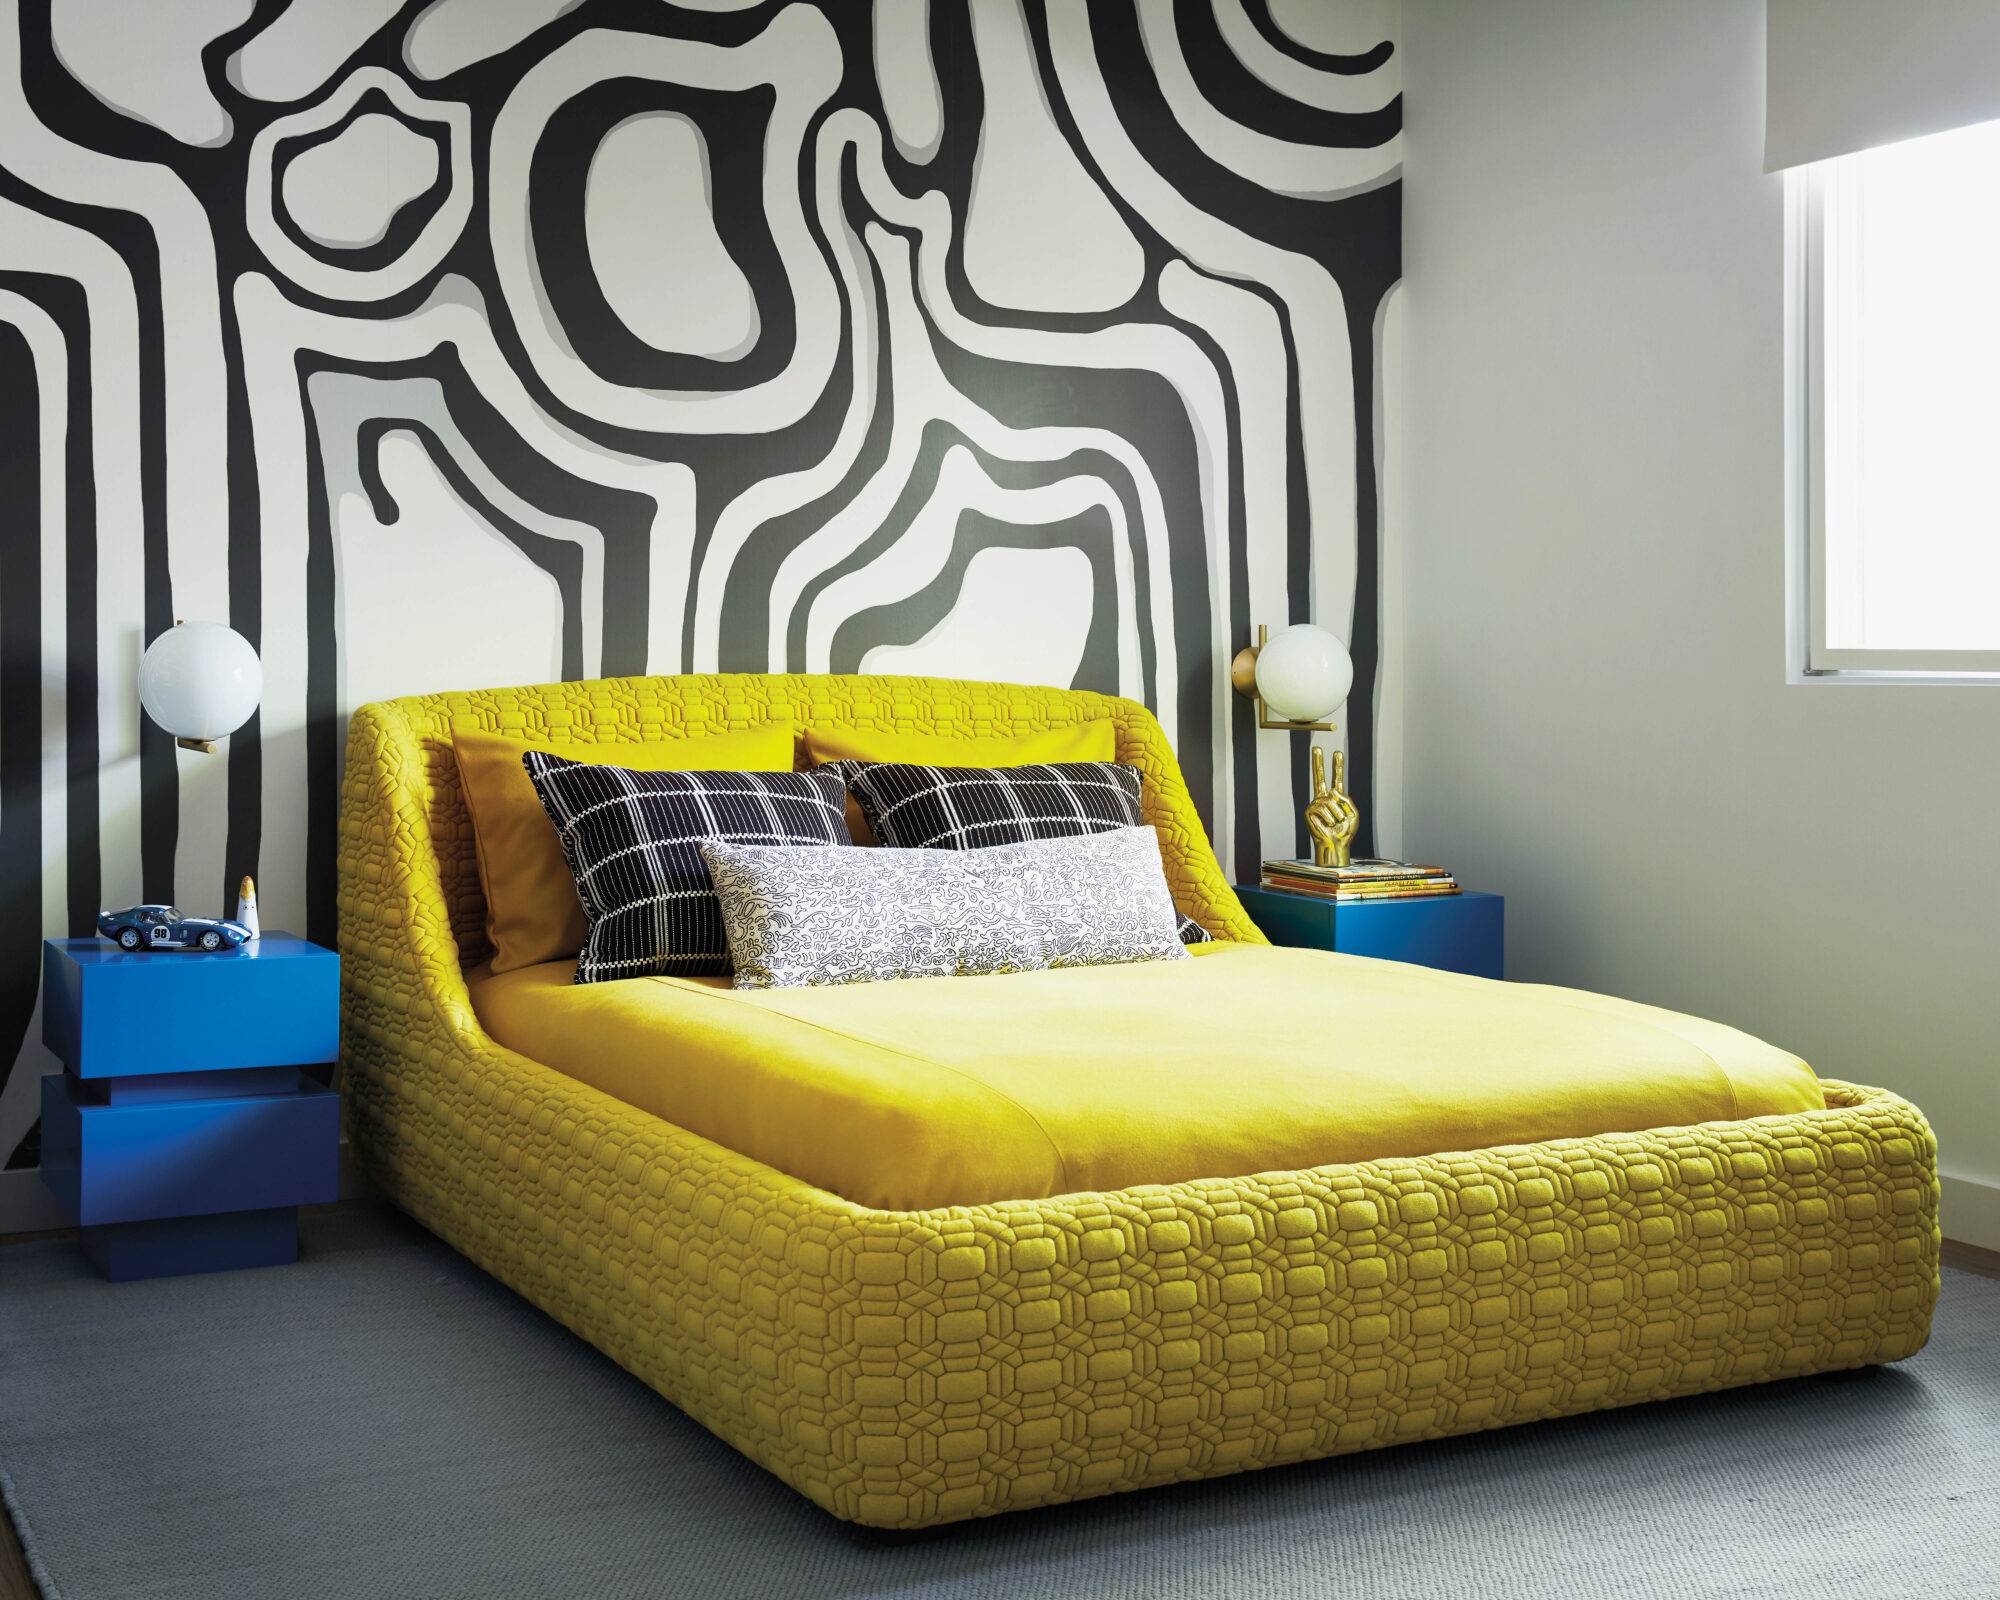 yellow bed with black and white mural